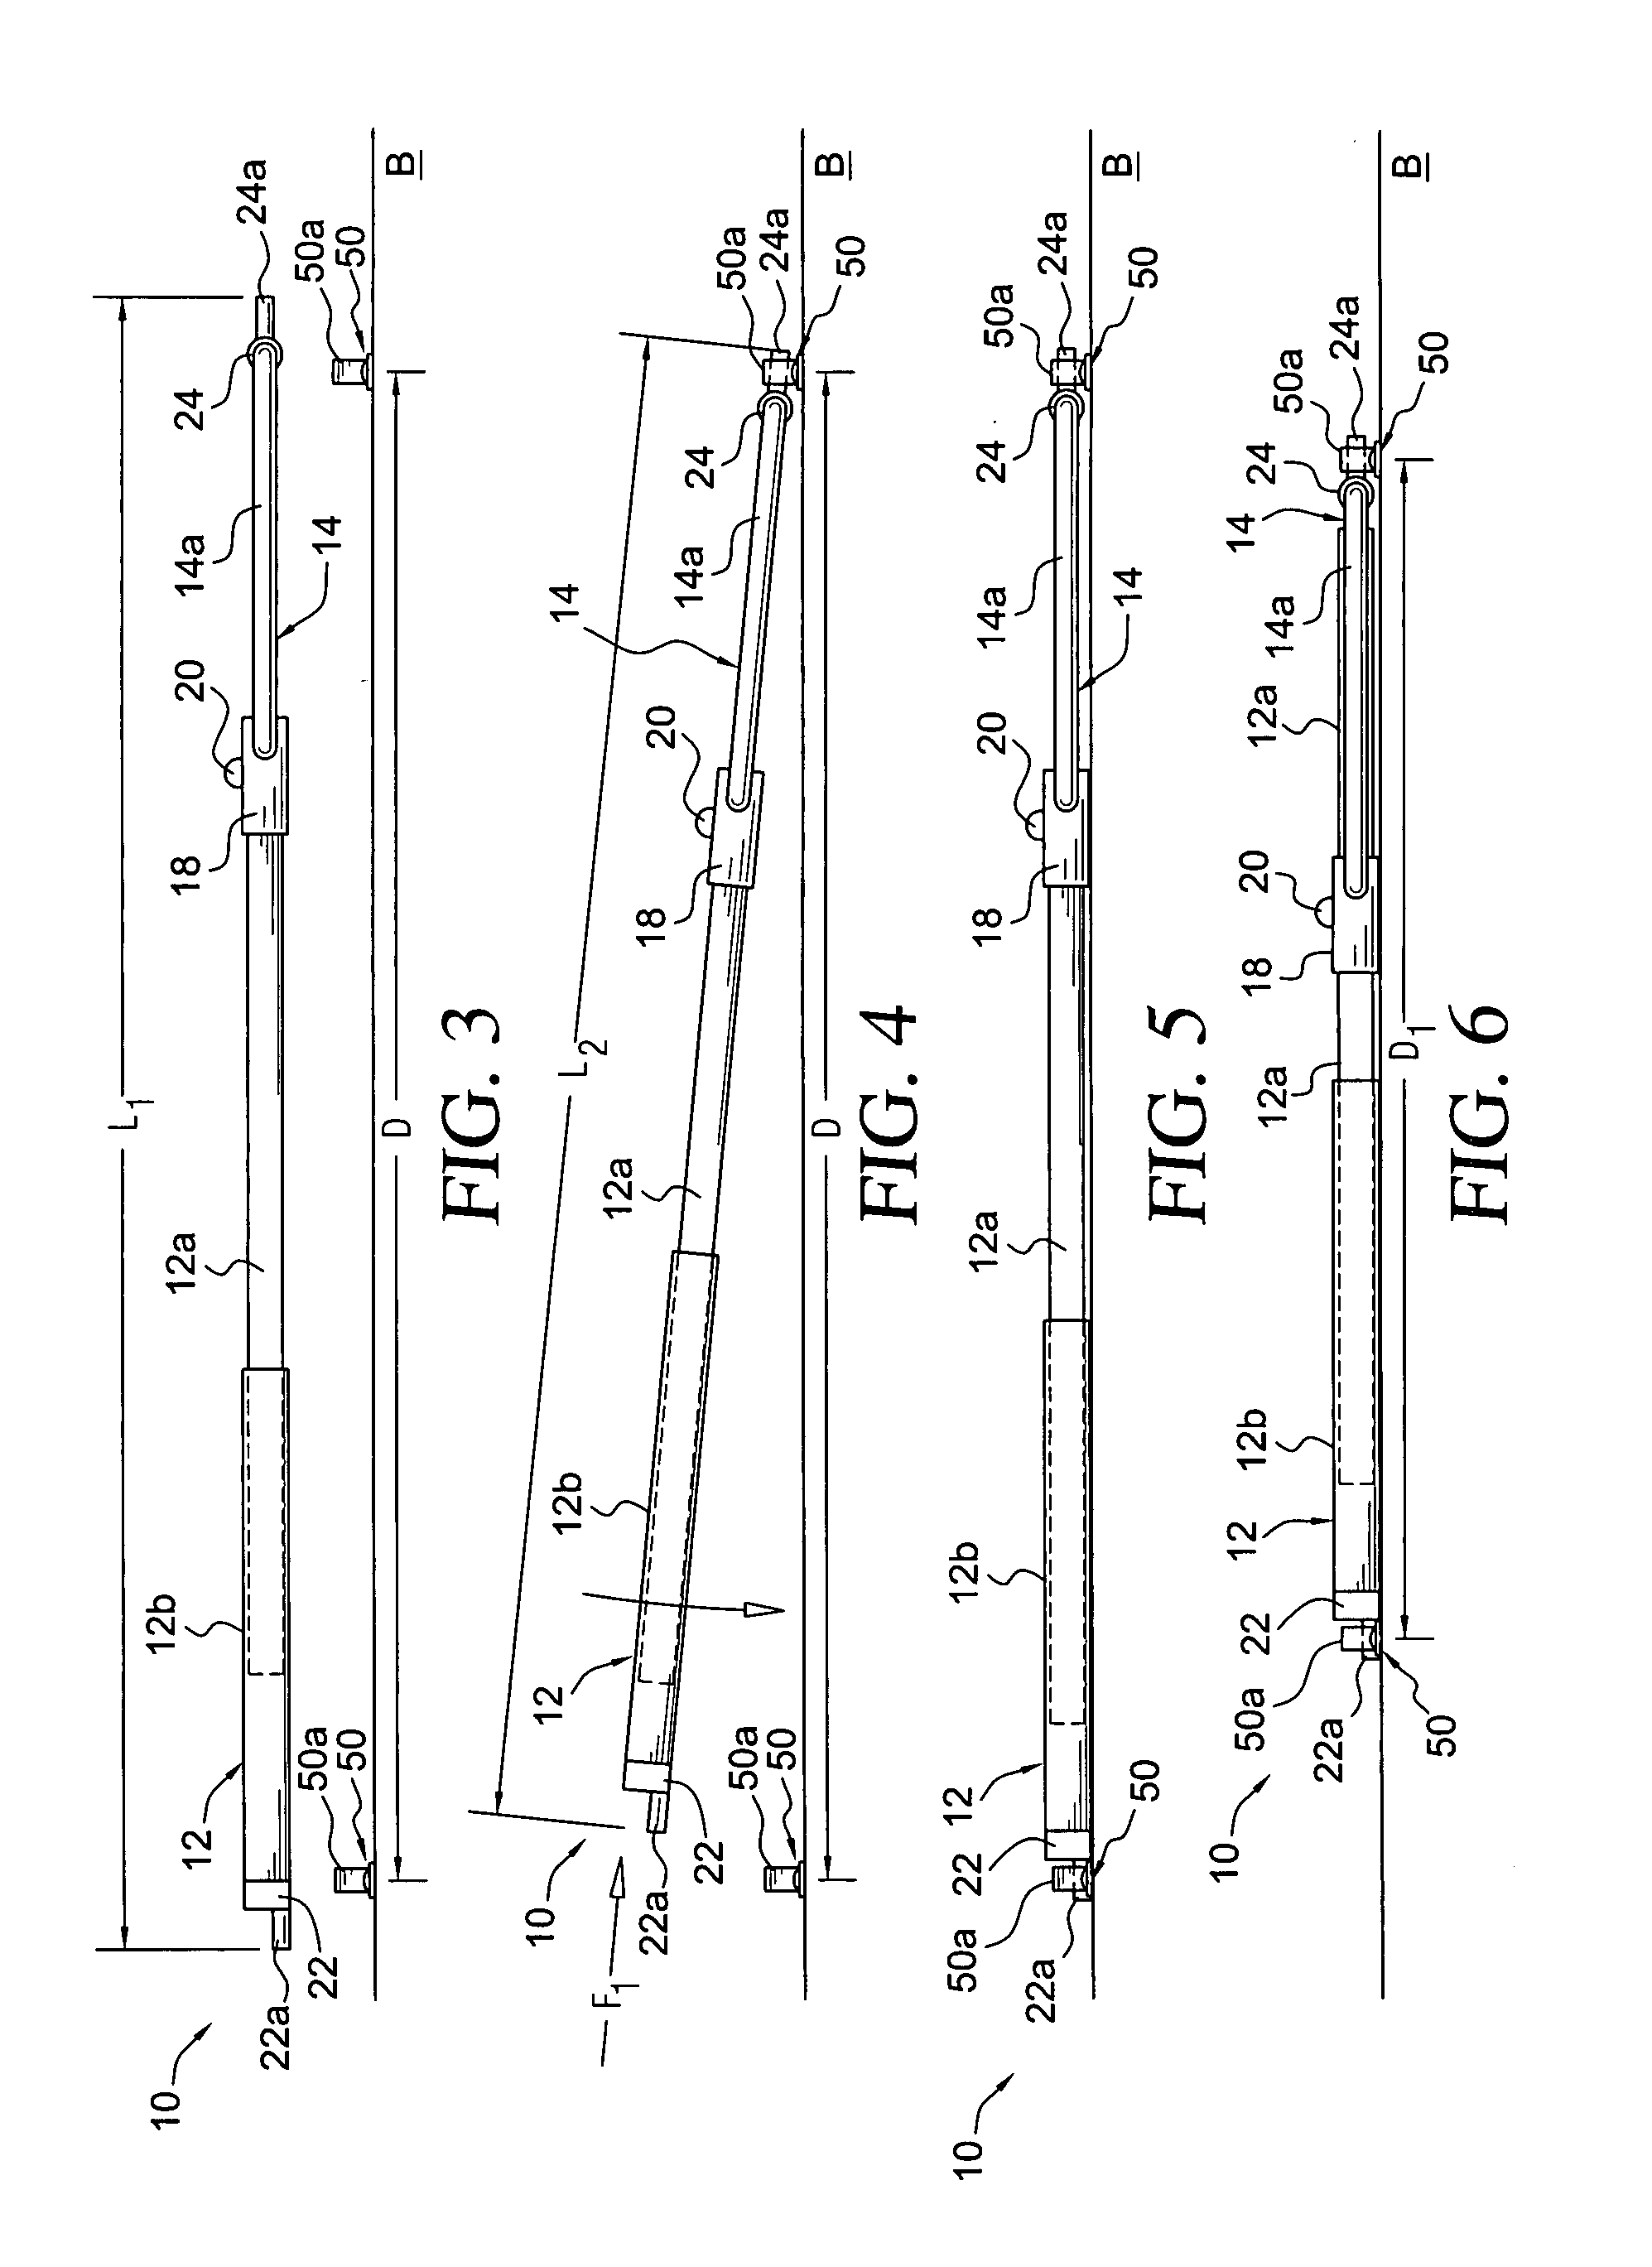 Fishing net device, and system